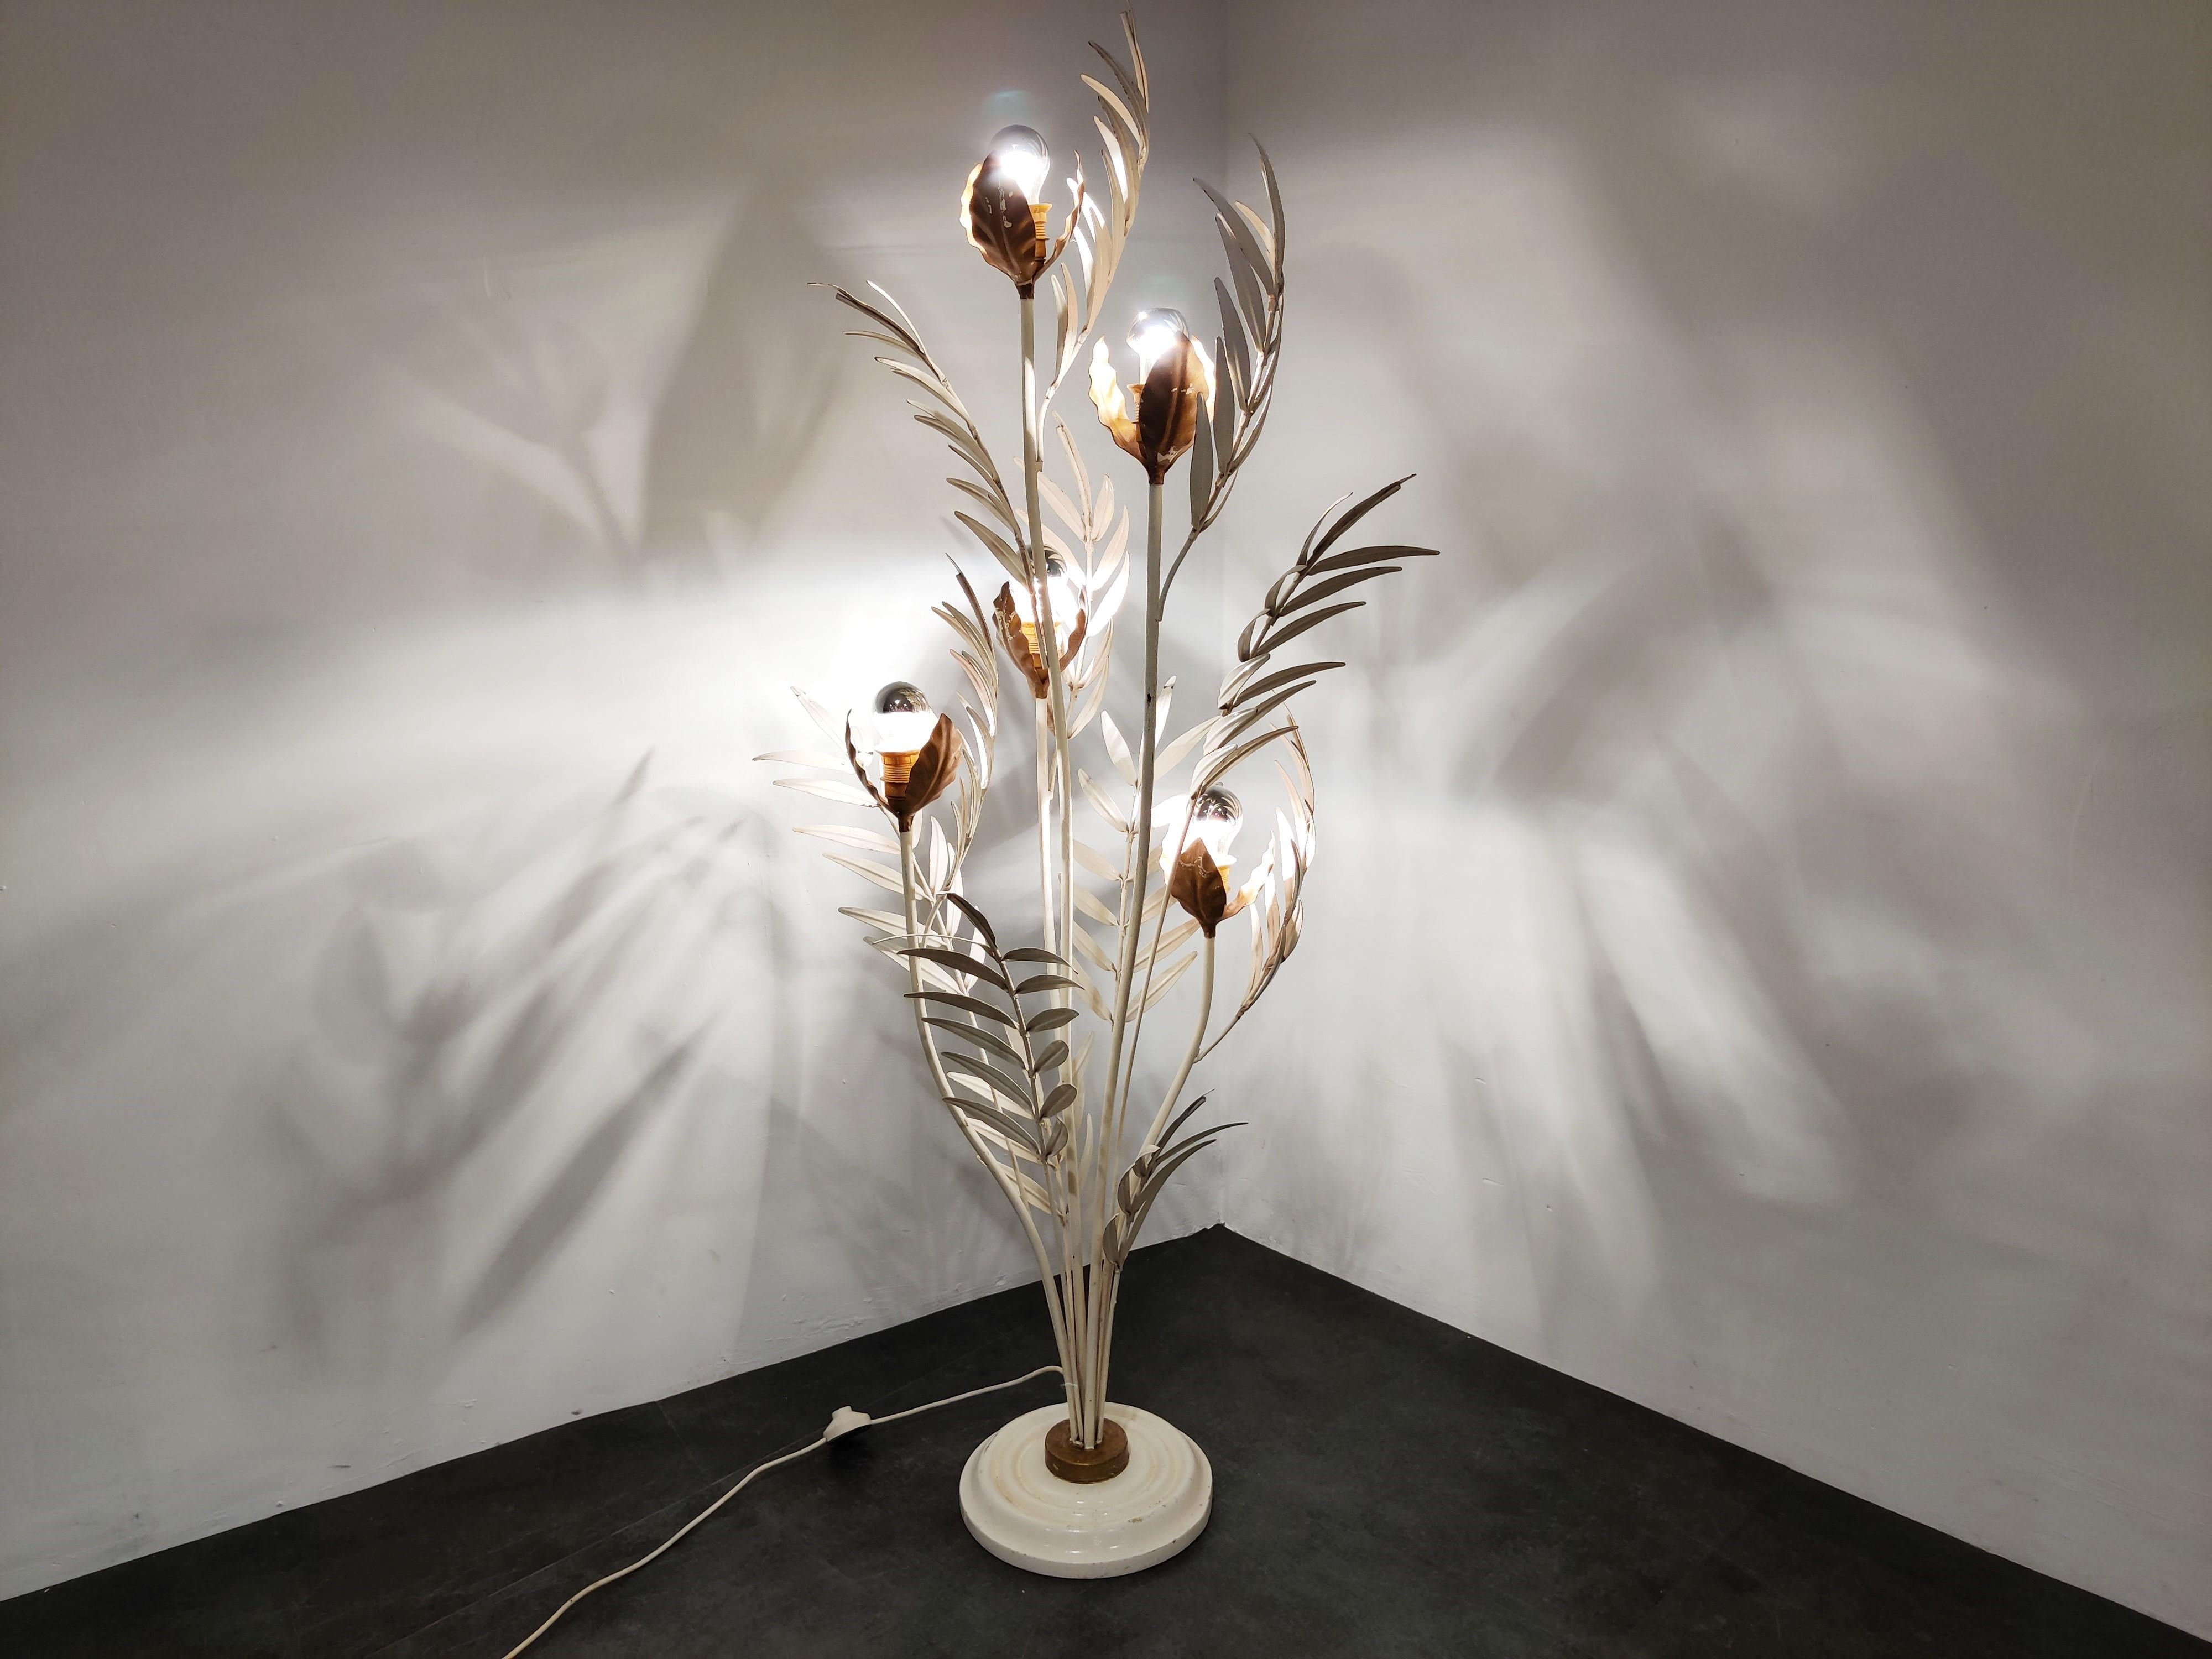 Midcentury flower floor lamp by Hans Kögl.

The lamp consists of gold colored metal and metal and white enameled flowers/leafs

The floor lamp emits an amazing light.

Very good condition.

Comes with a foot switch.

Tested and ready to